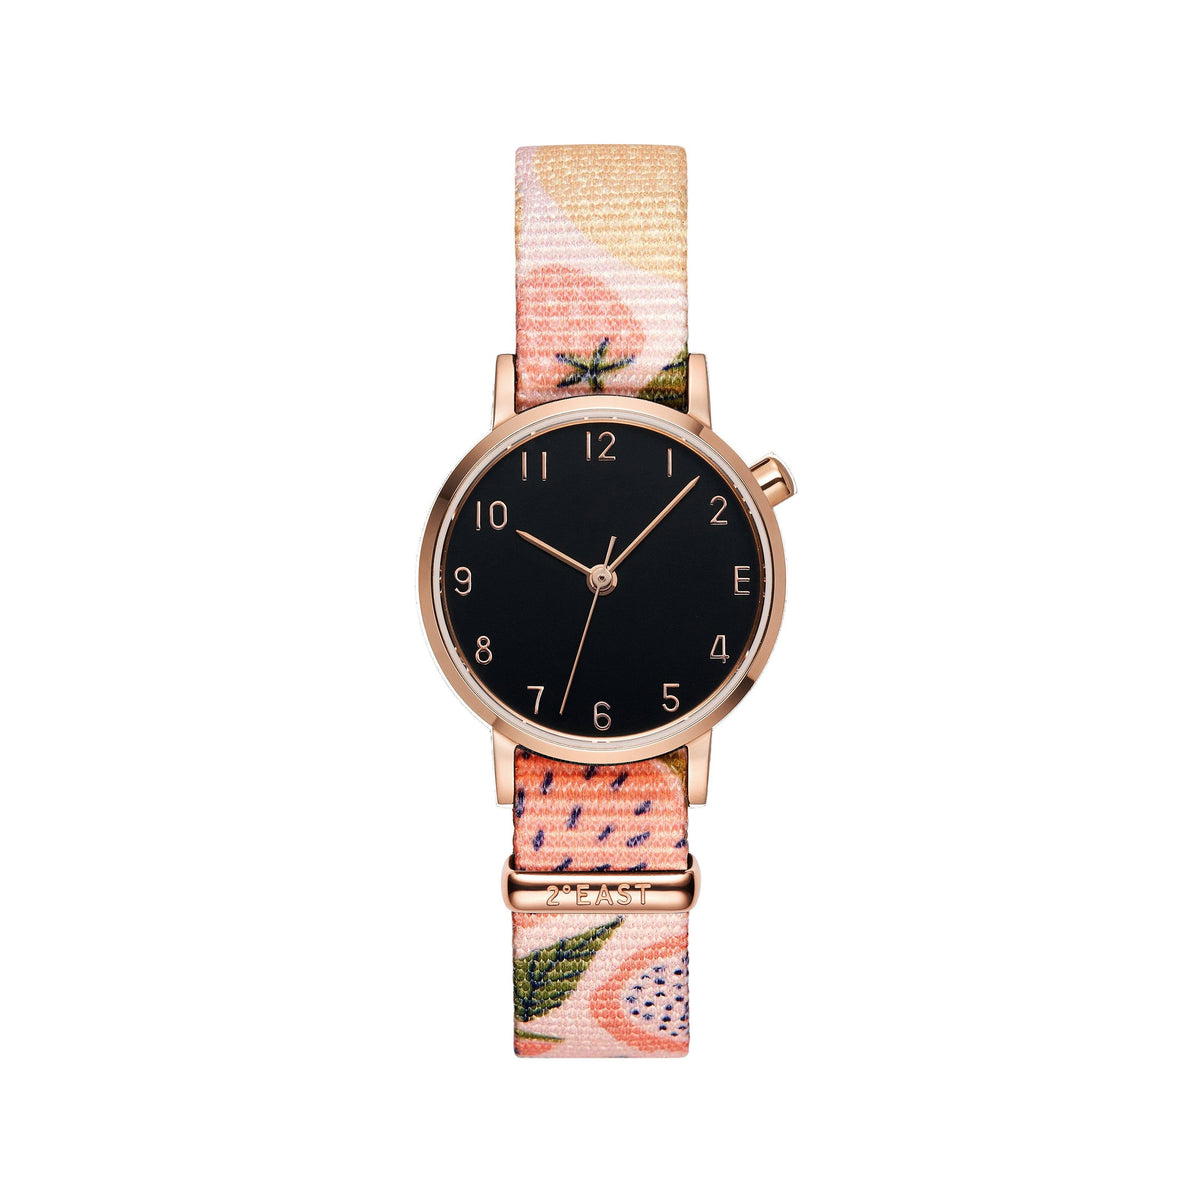 The Black and Rose Gold Watch -  Fruity (Kids)